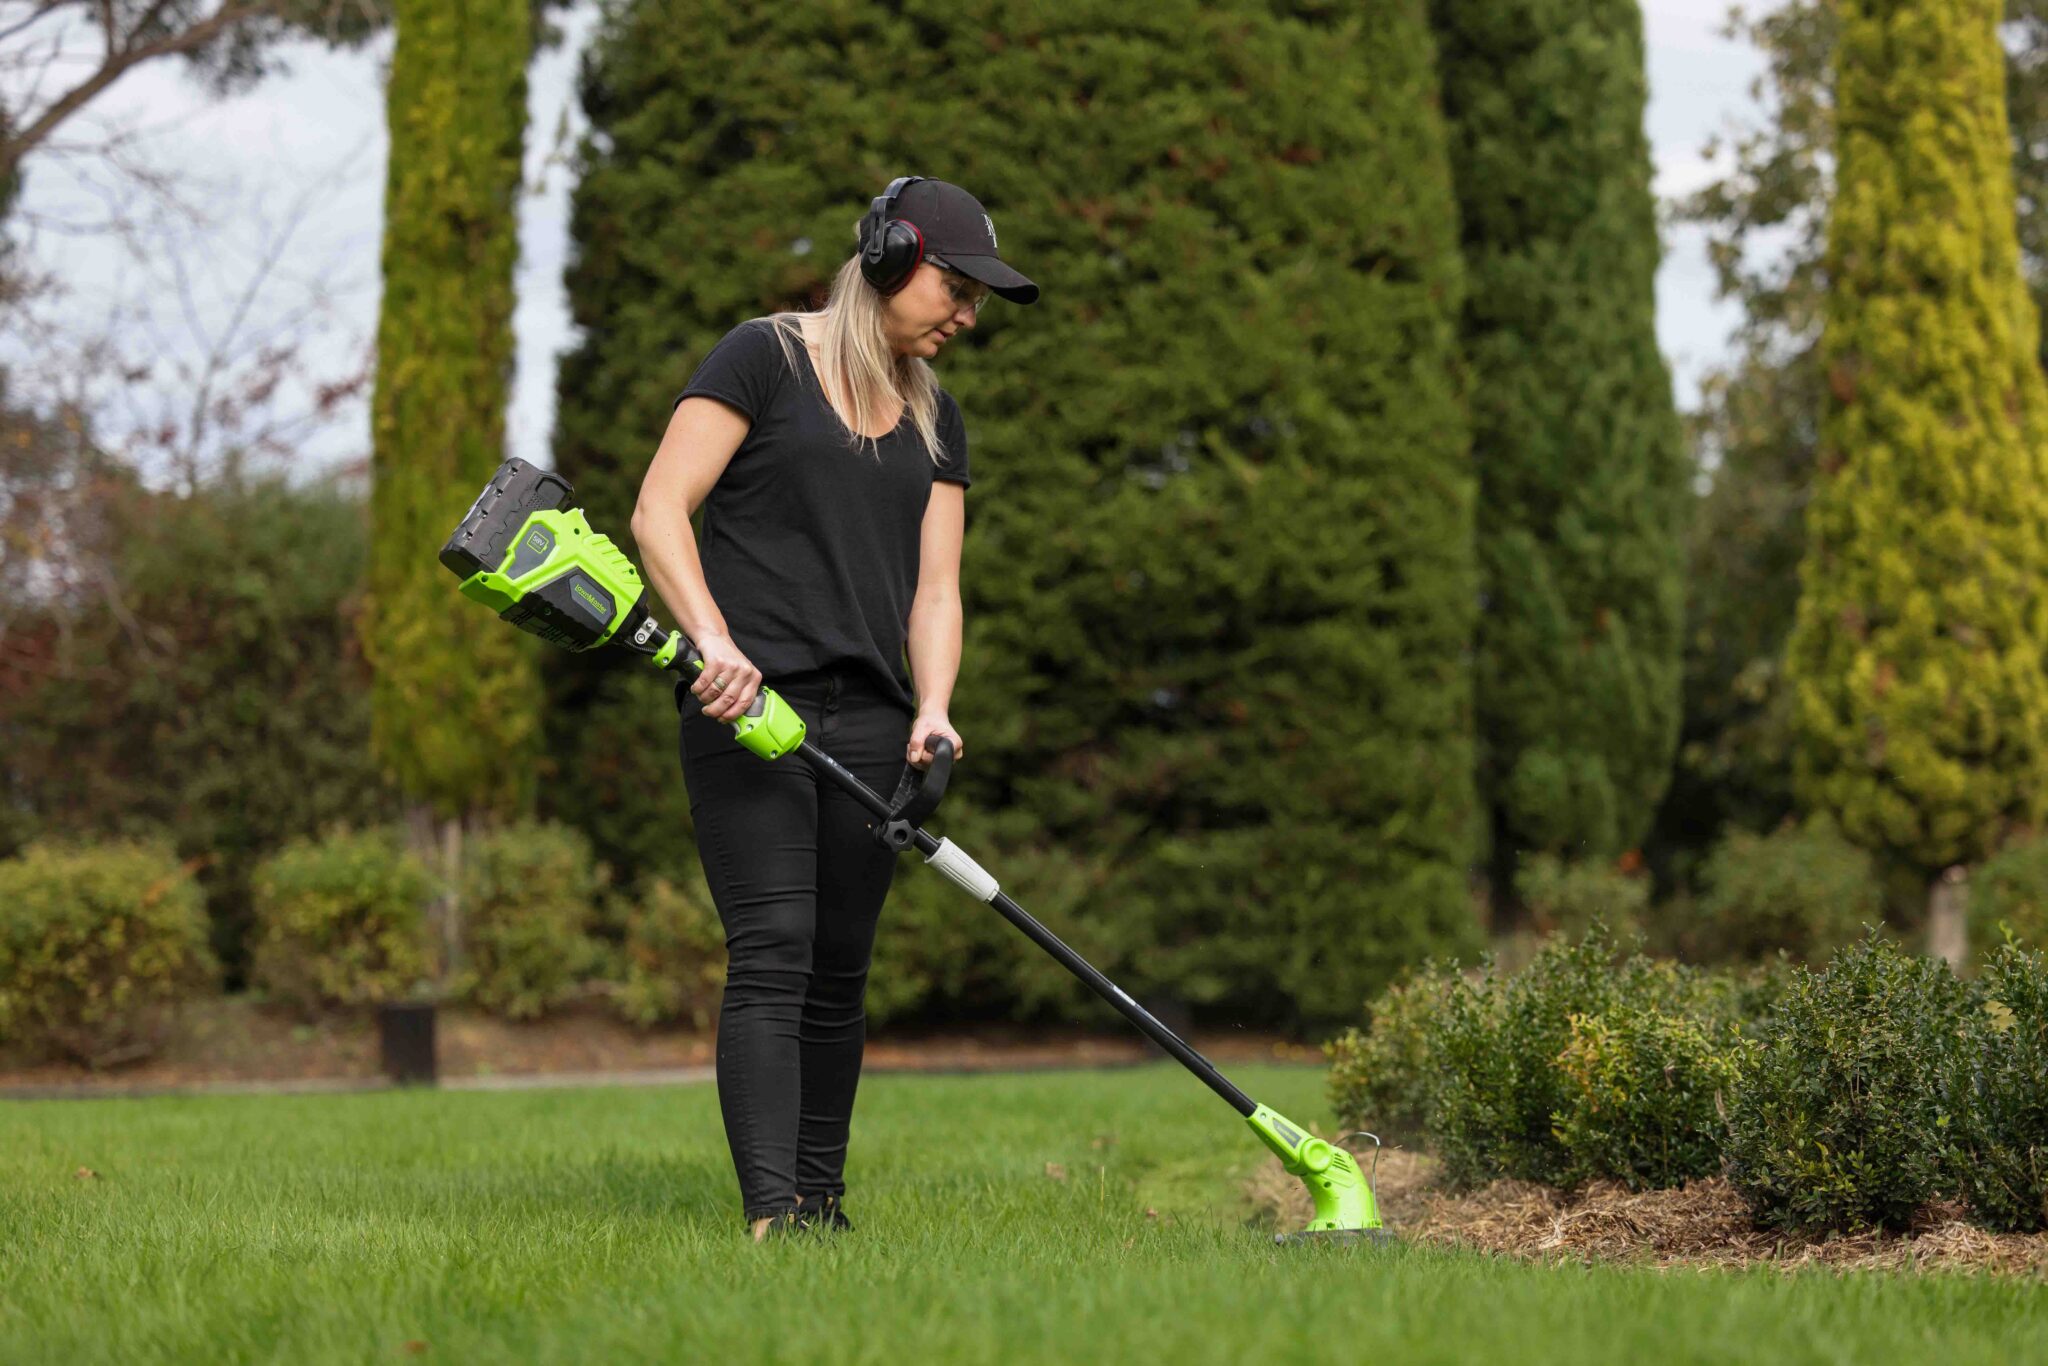 Woman using brushcutter line trimmer tool in garden setting